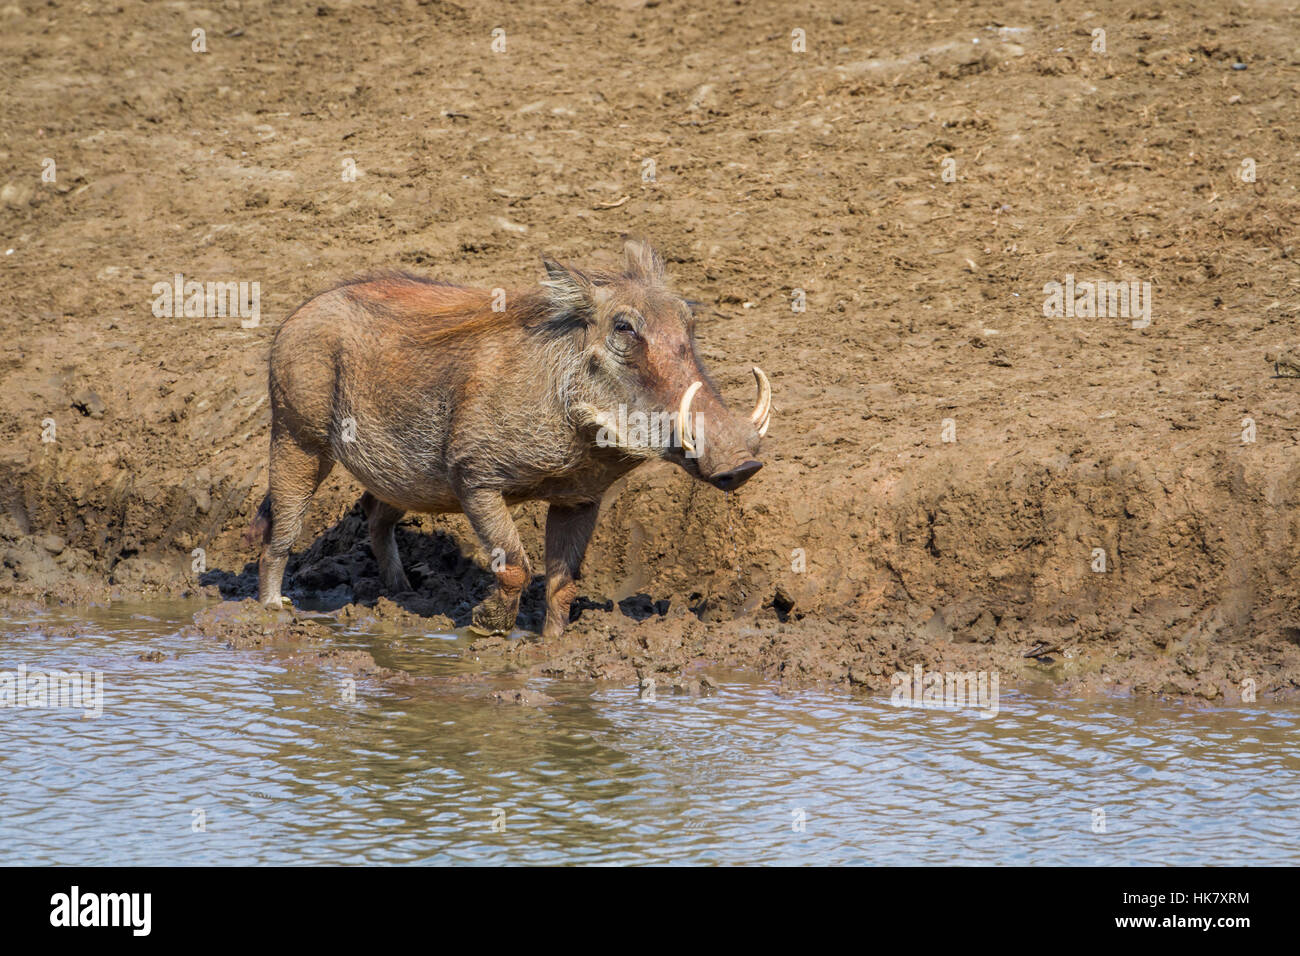 Common warthog in Kruger national park, South Africa ; Specie Phacochoerus africanus family of Suidae Stock Photo